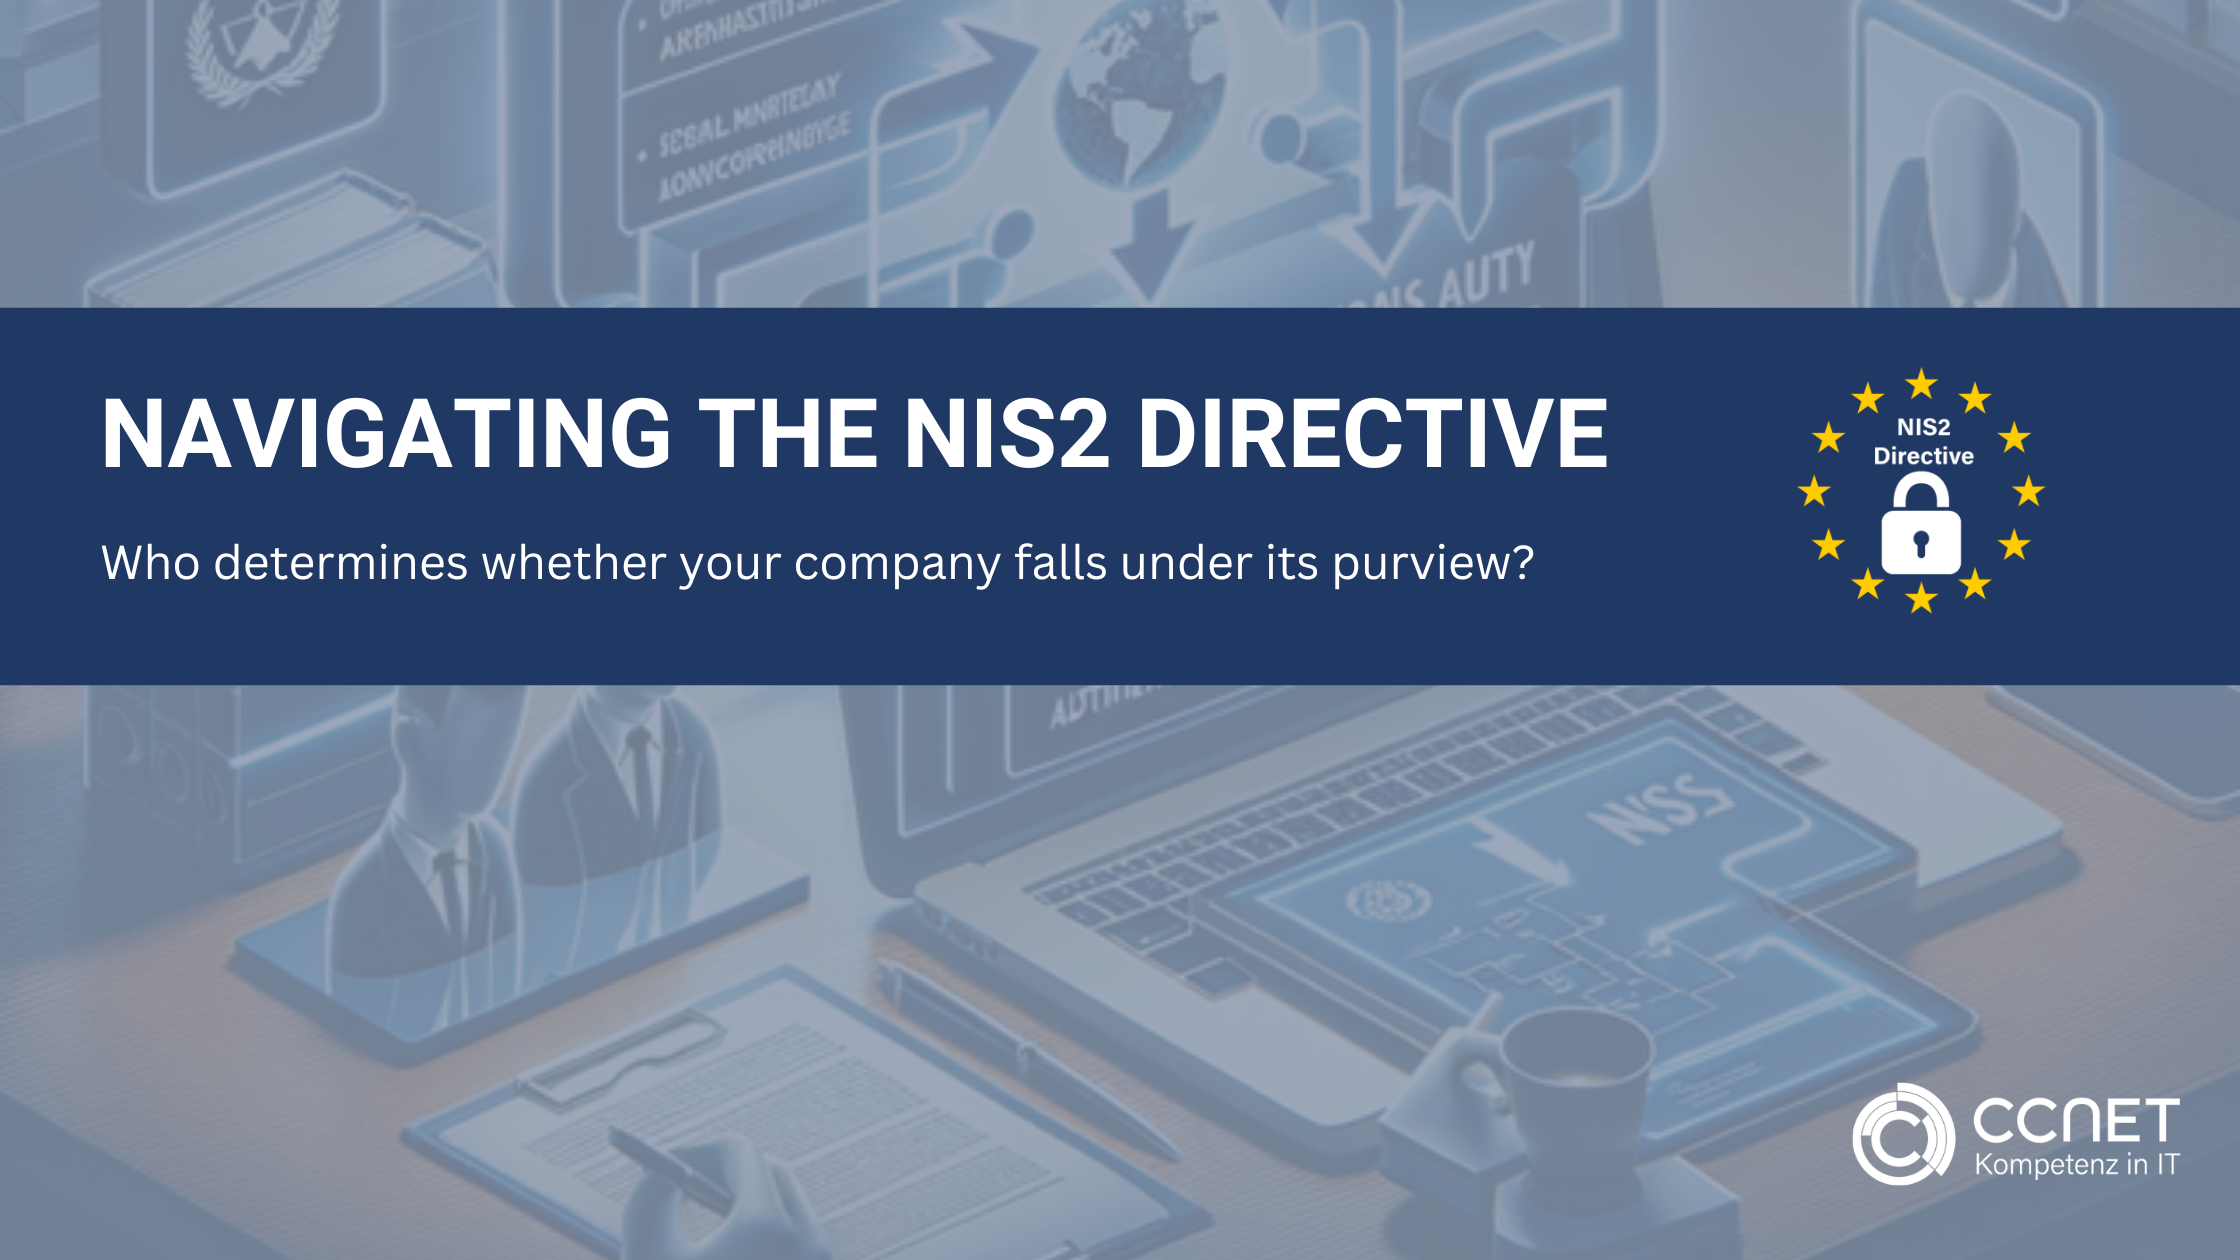 Navigating the NIS2 Directive: Who determines whether your company falls under its purview?